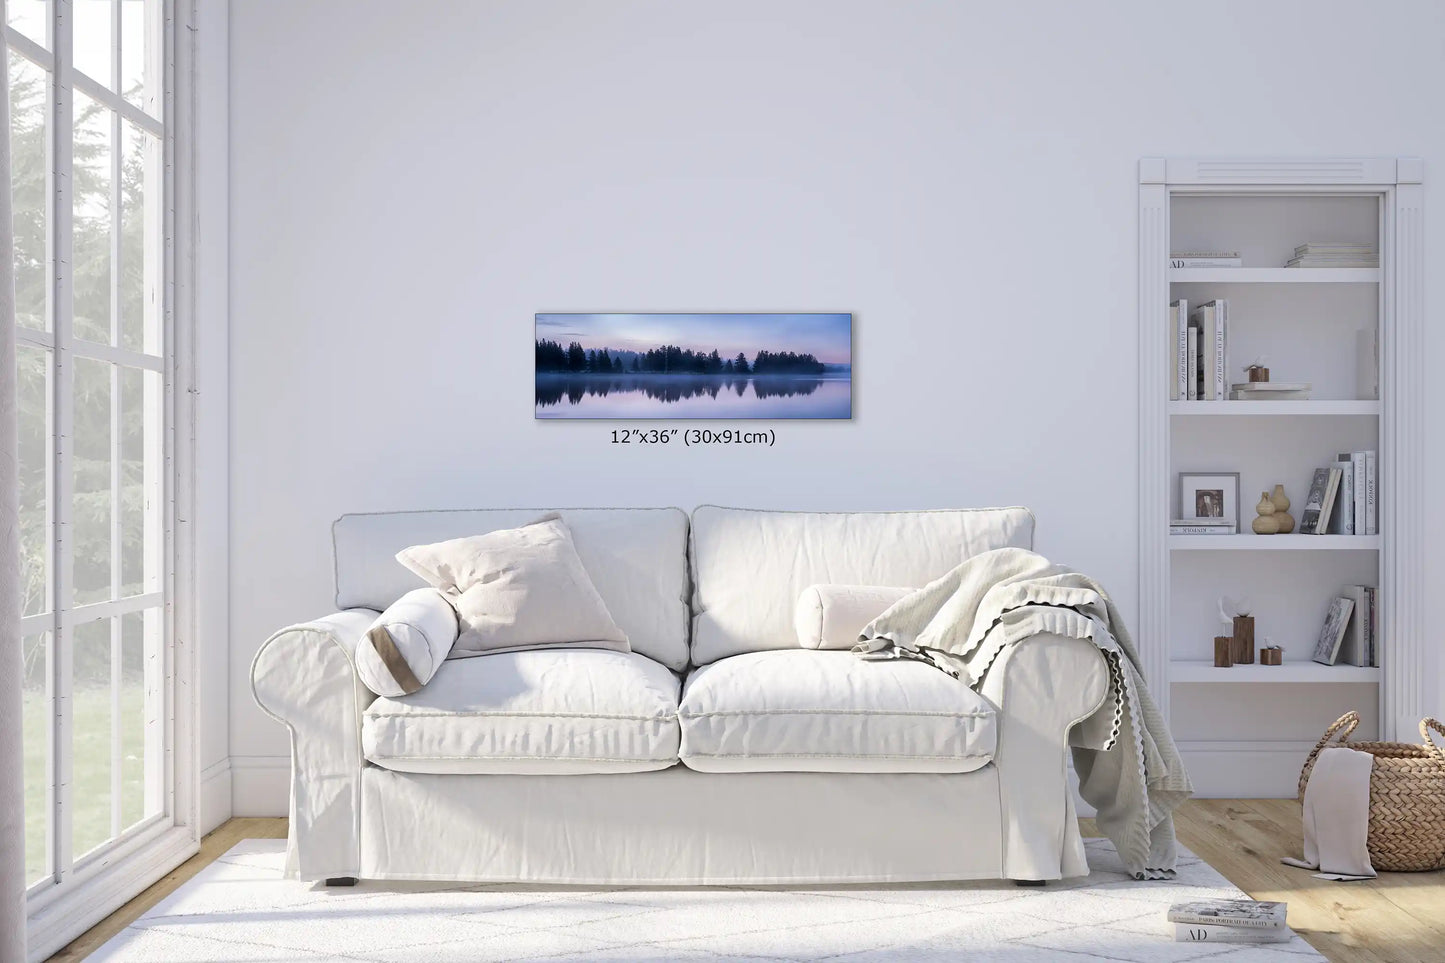 Panoramic 12x36 wall art of Yellowstone Lake's forest in twilight reflection, above a cozy white sofa, adding tranquility to the living space.